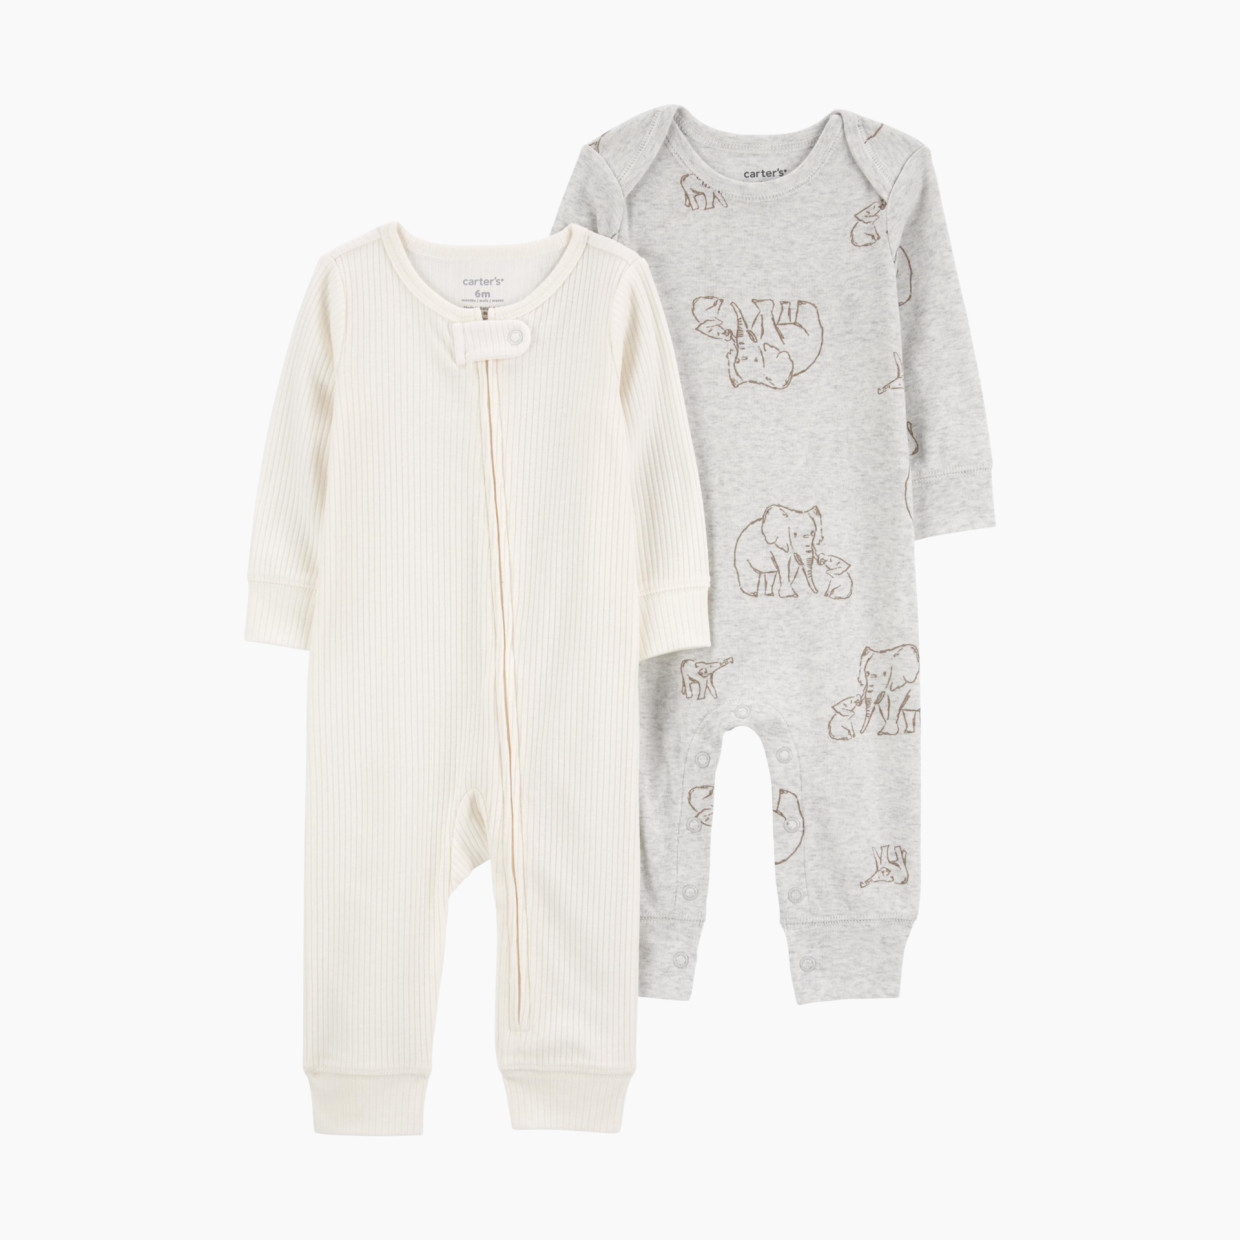 Carter's 2-Pack Jumpsuits - Grey/White, 6 M.